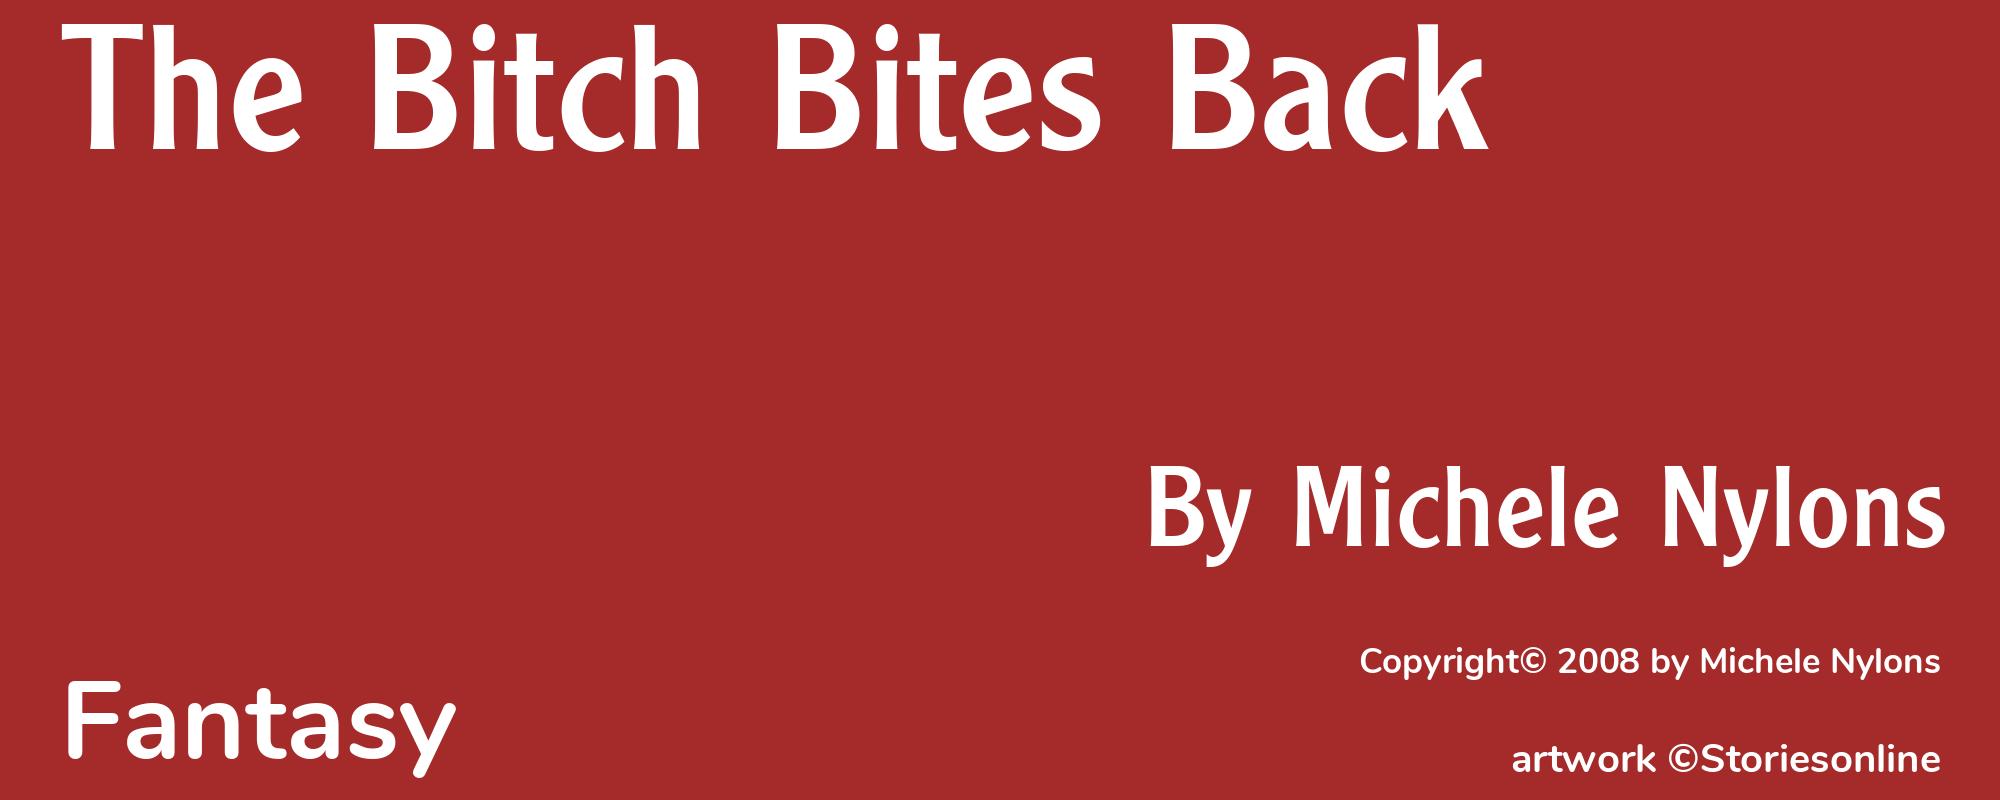 The Bitch Bites Back - Cover